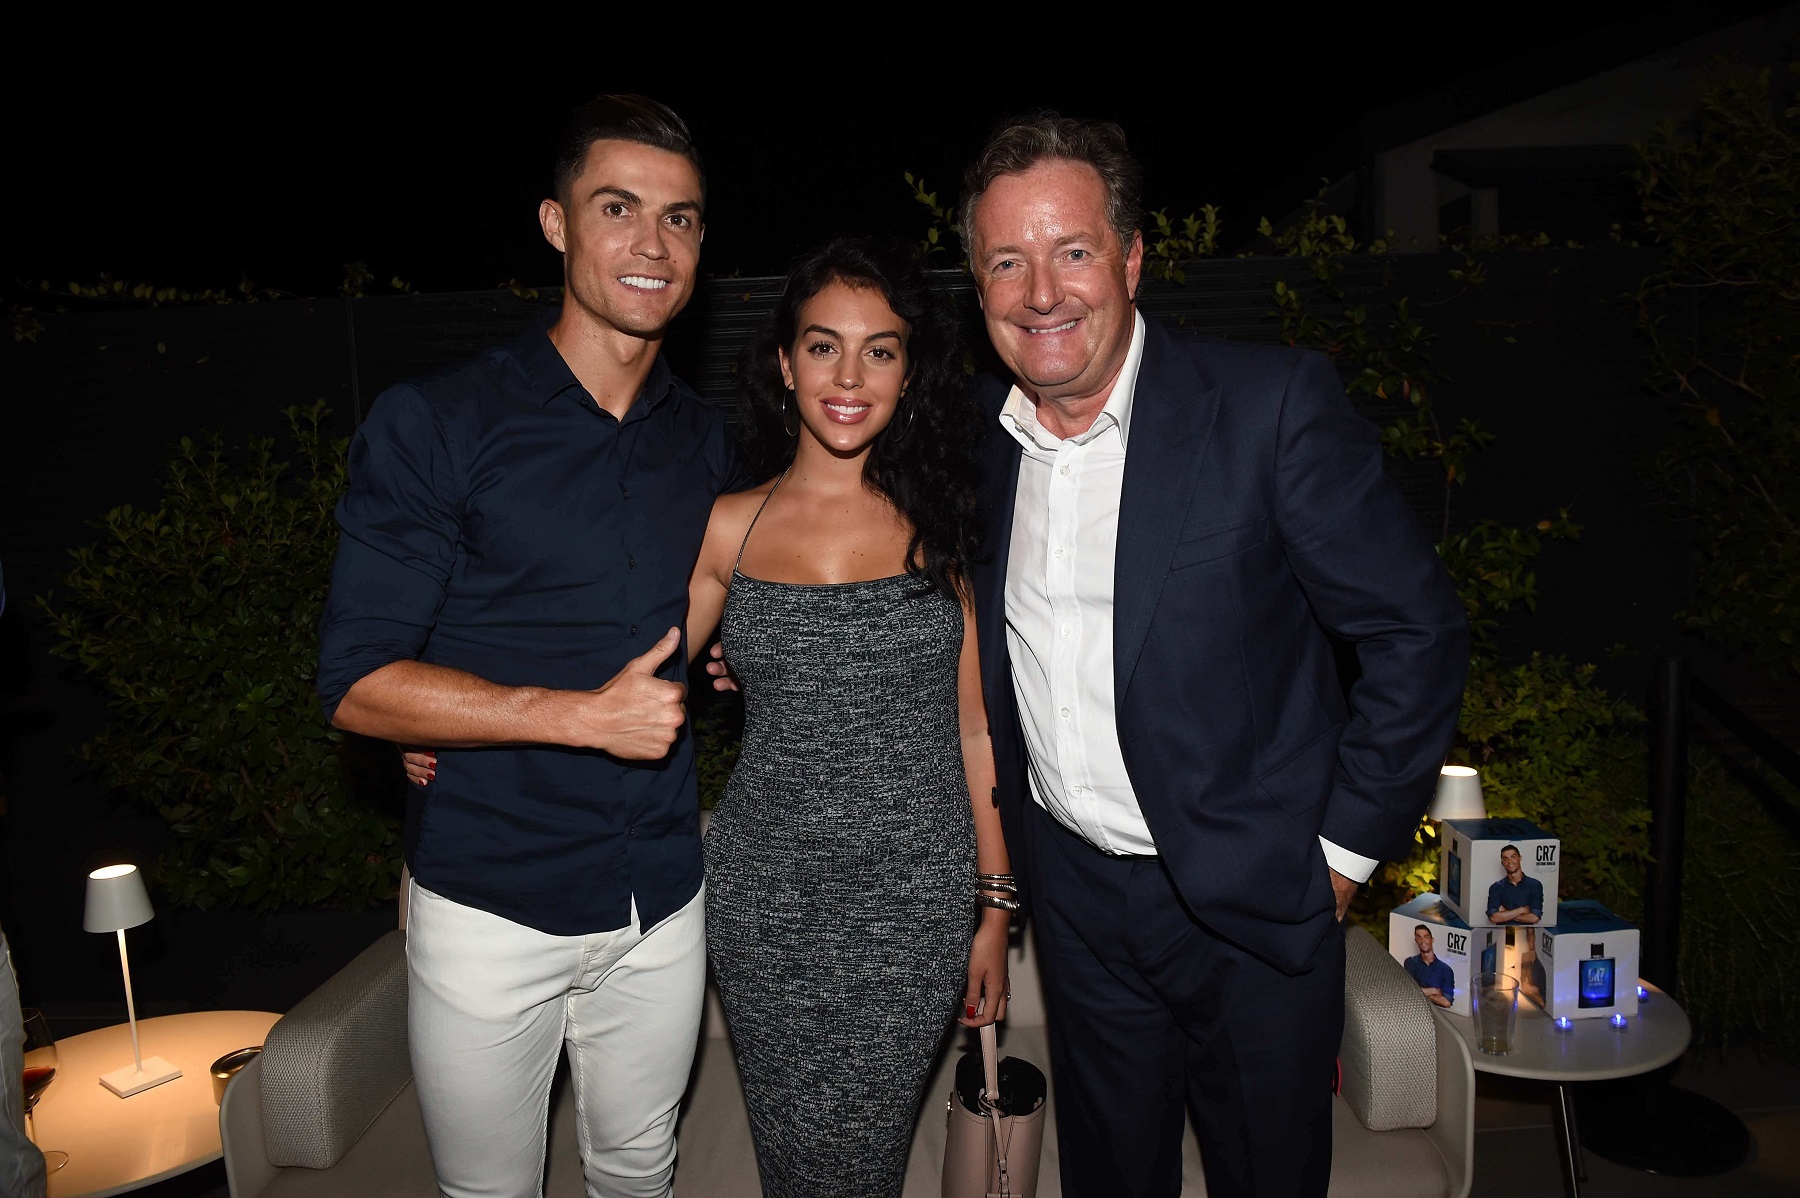 TURIN, ITALY - SEPTEMBER 12: Cristiano Ronaldo, Georgina Rodriguez and Piers Morgan celebrate the launch of new CR7 Play It Cool with friends and family on September 12, 2019 in Turin, Italy. (Photo by Tullio M. Puglia/Getty Images for CR7 Play It Cool)